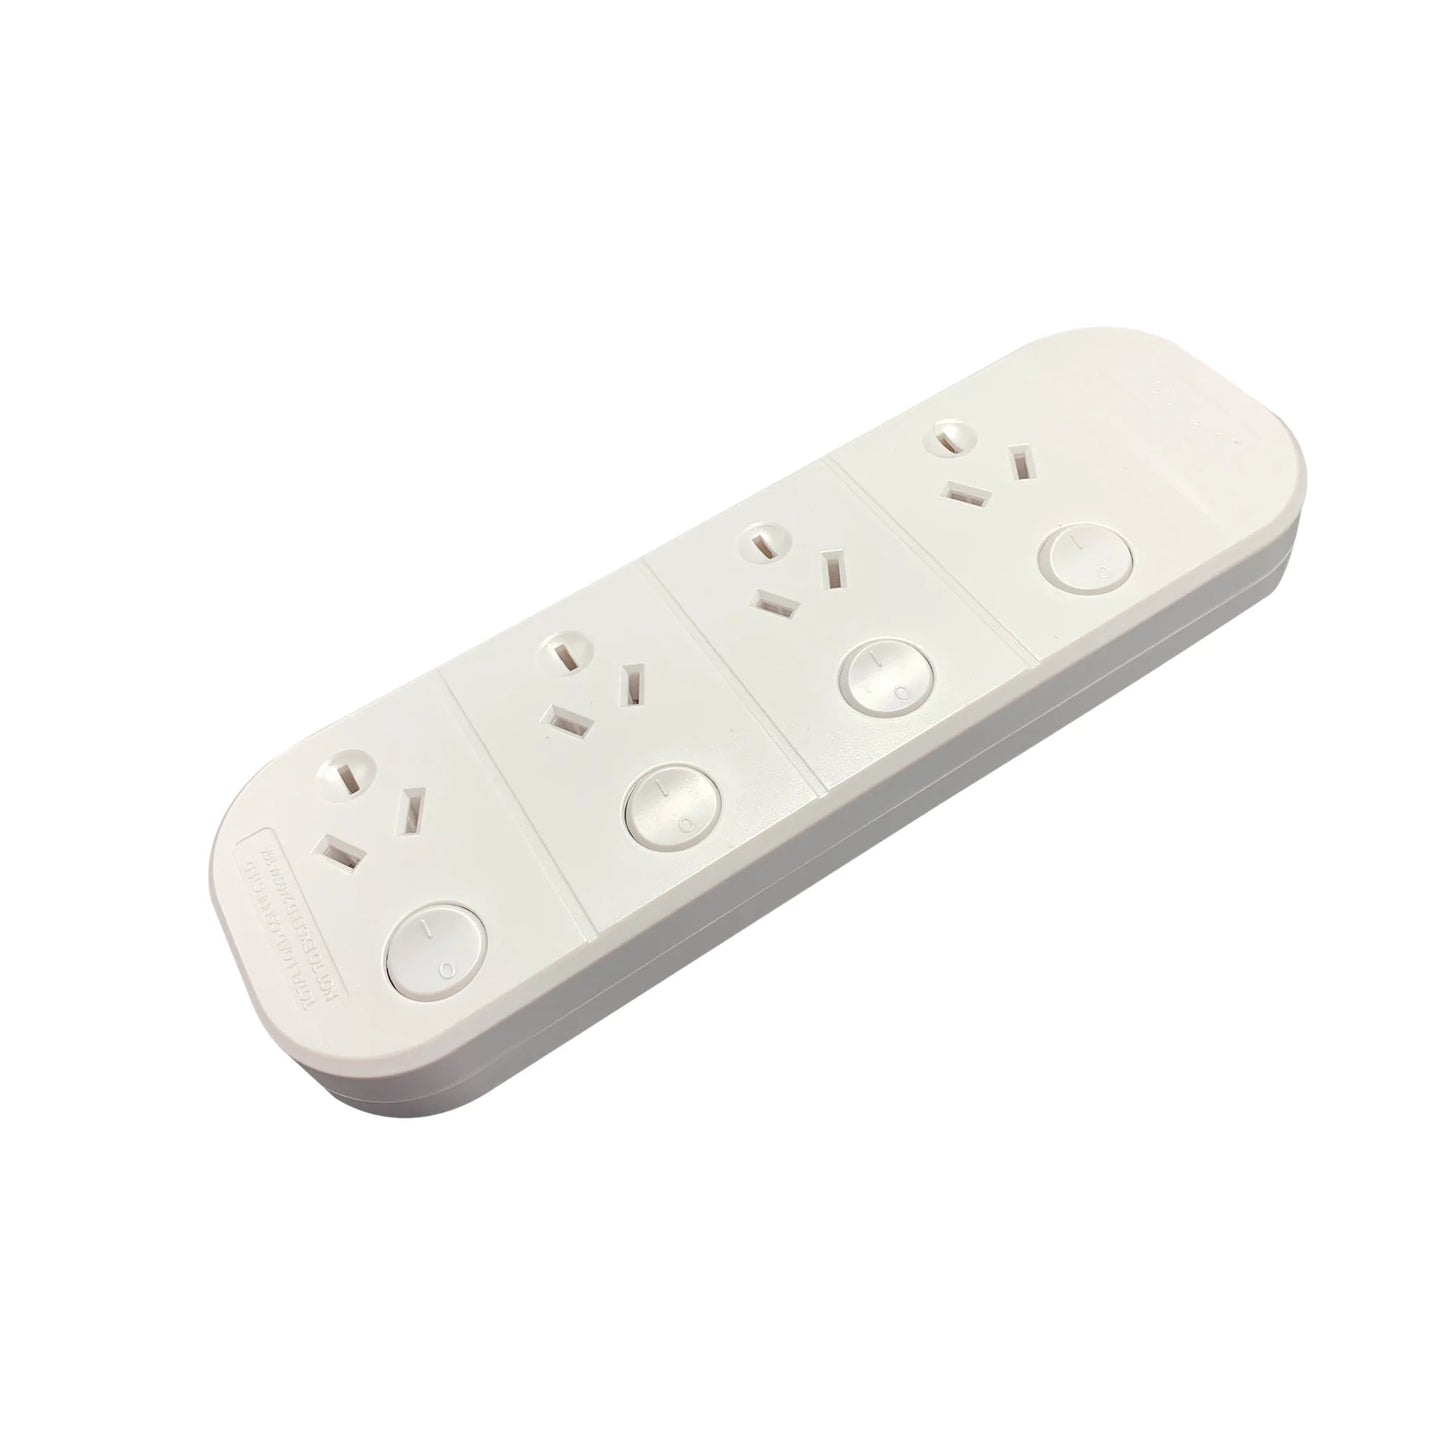 POWERBOARD JACKSON INDUSTRIES 4 OUTLET OVERLOAD SWITCHED WHITE